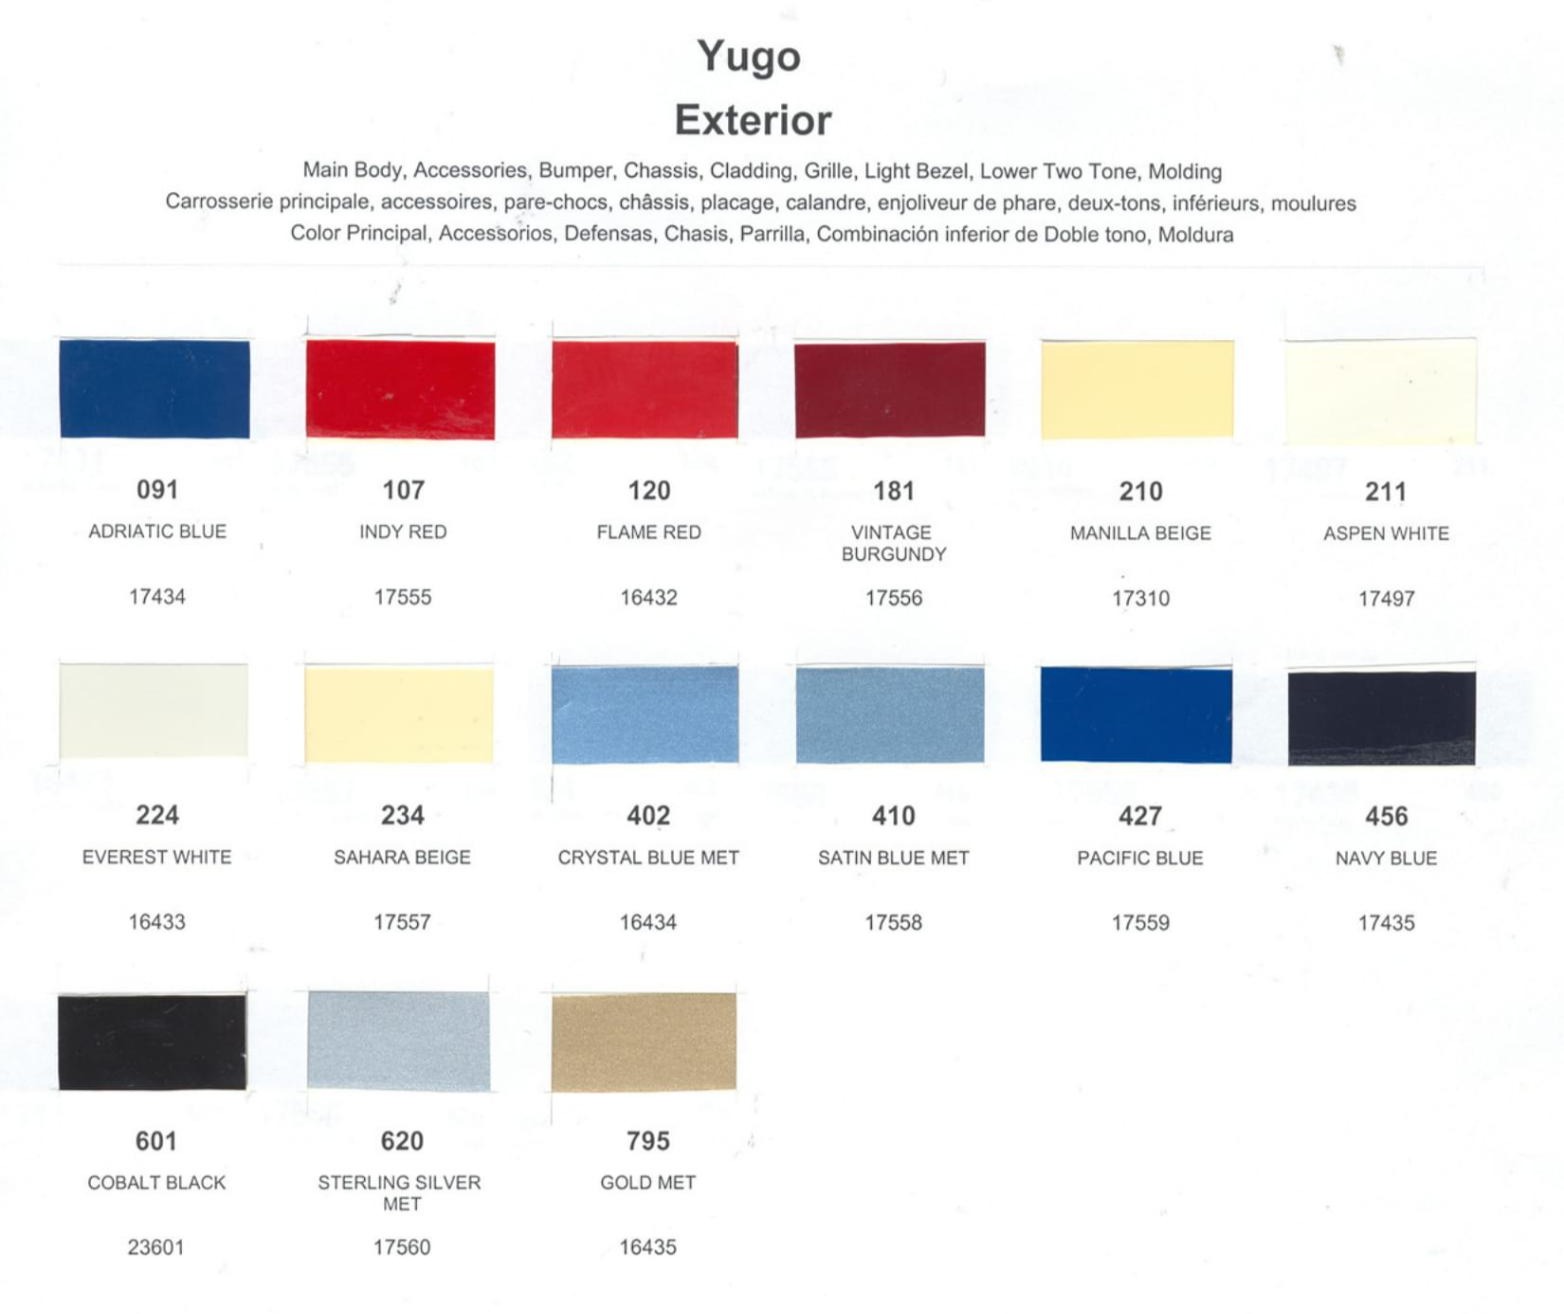 Exterior Colors and their paint codes used on Yugo in 1990